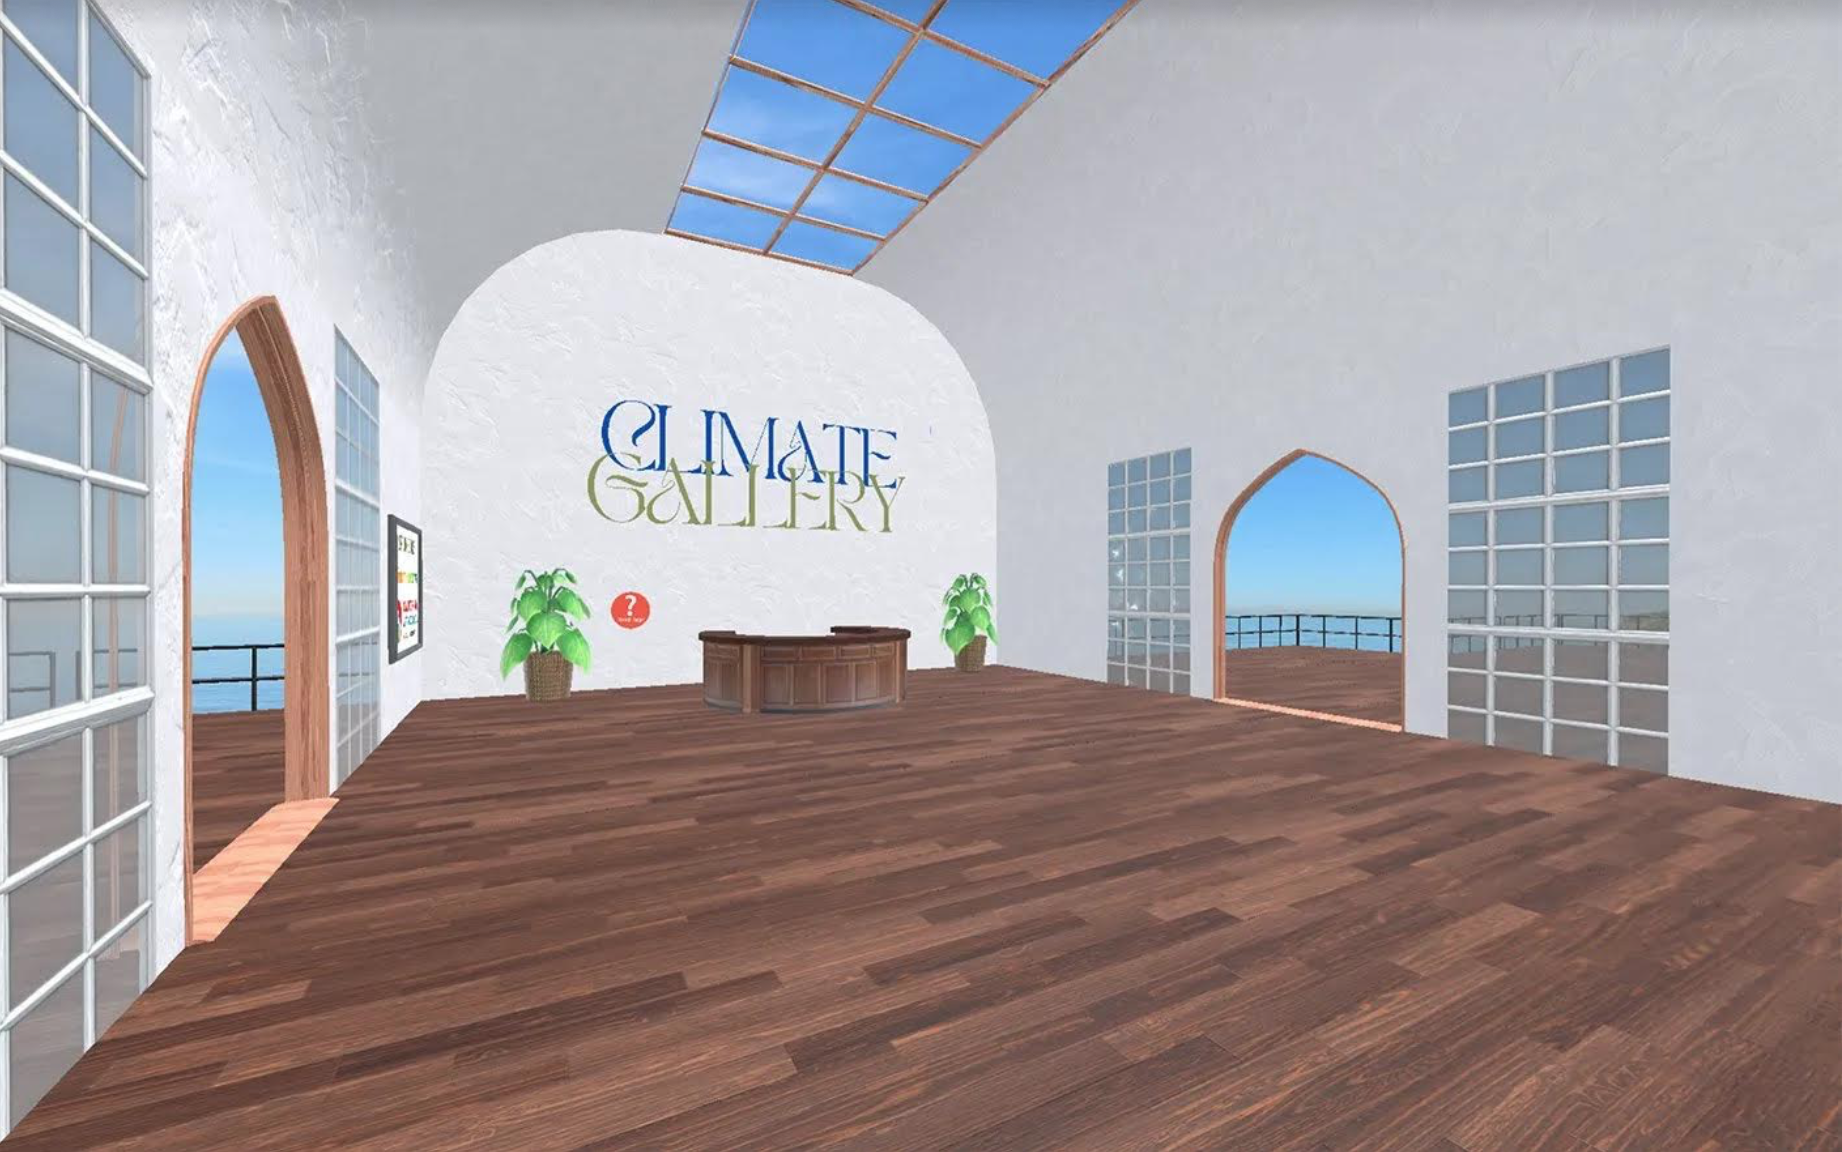 Lifelike computer image of a large room with white walls, a wood floor, arches leading outside to decks, and the words "CLIMATE GALLERY" on a wall in front of a desk and two potted plants